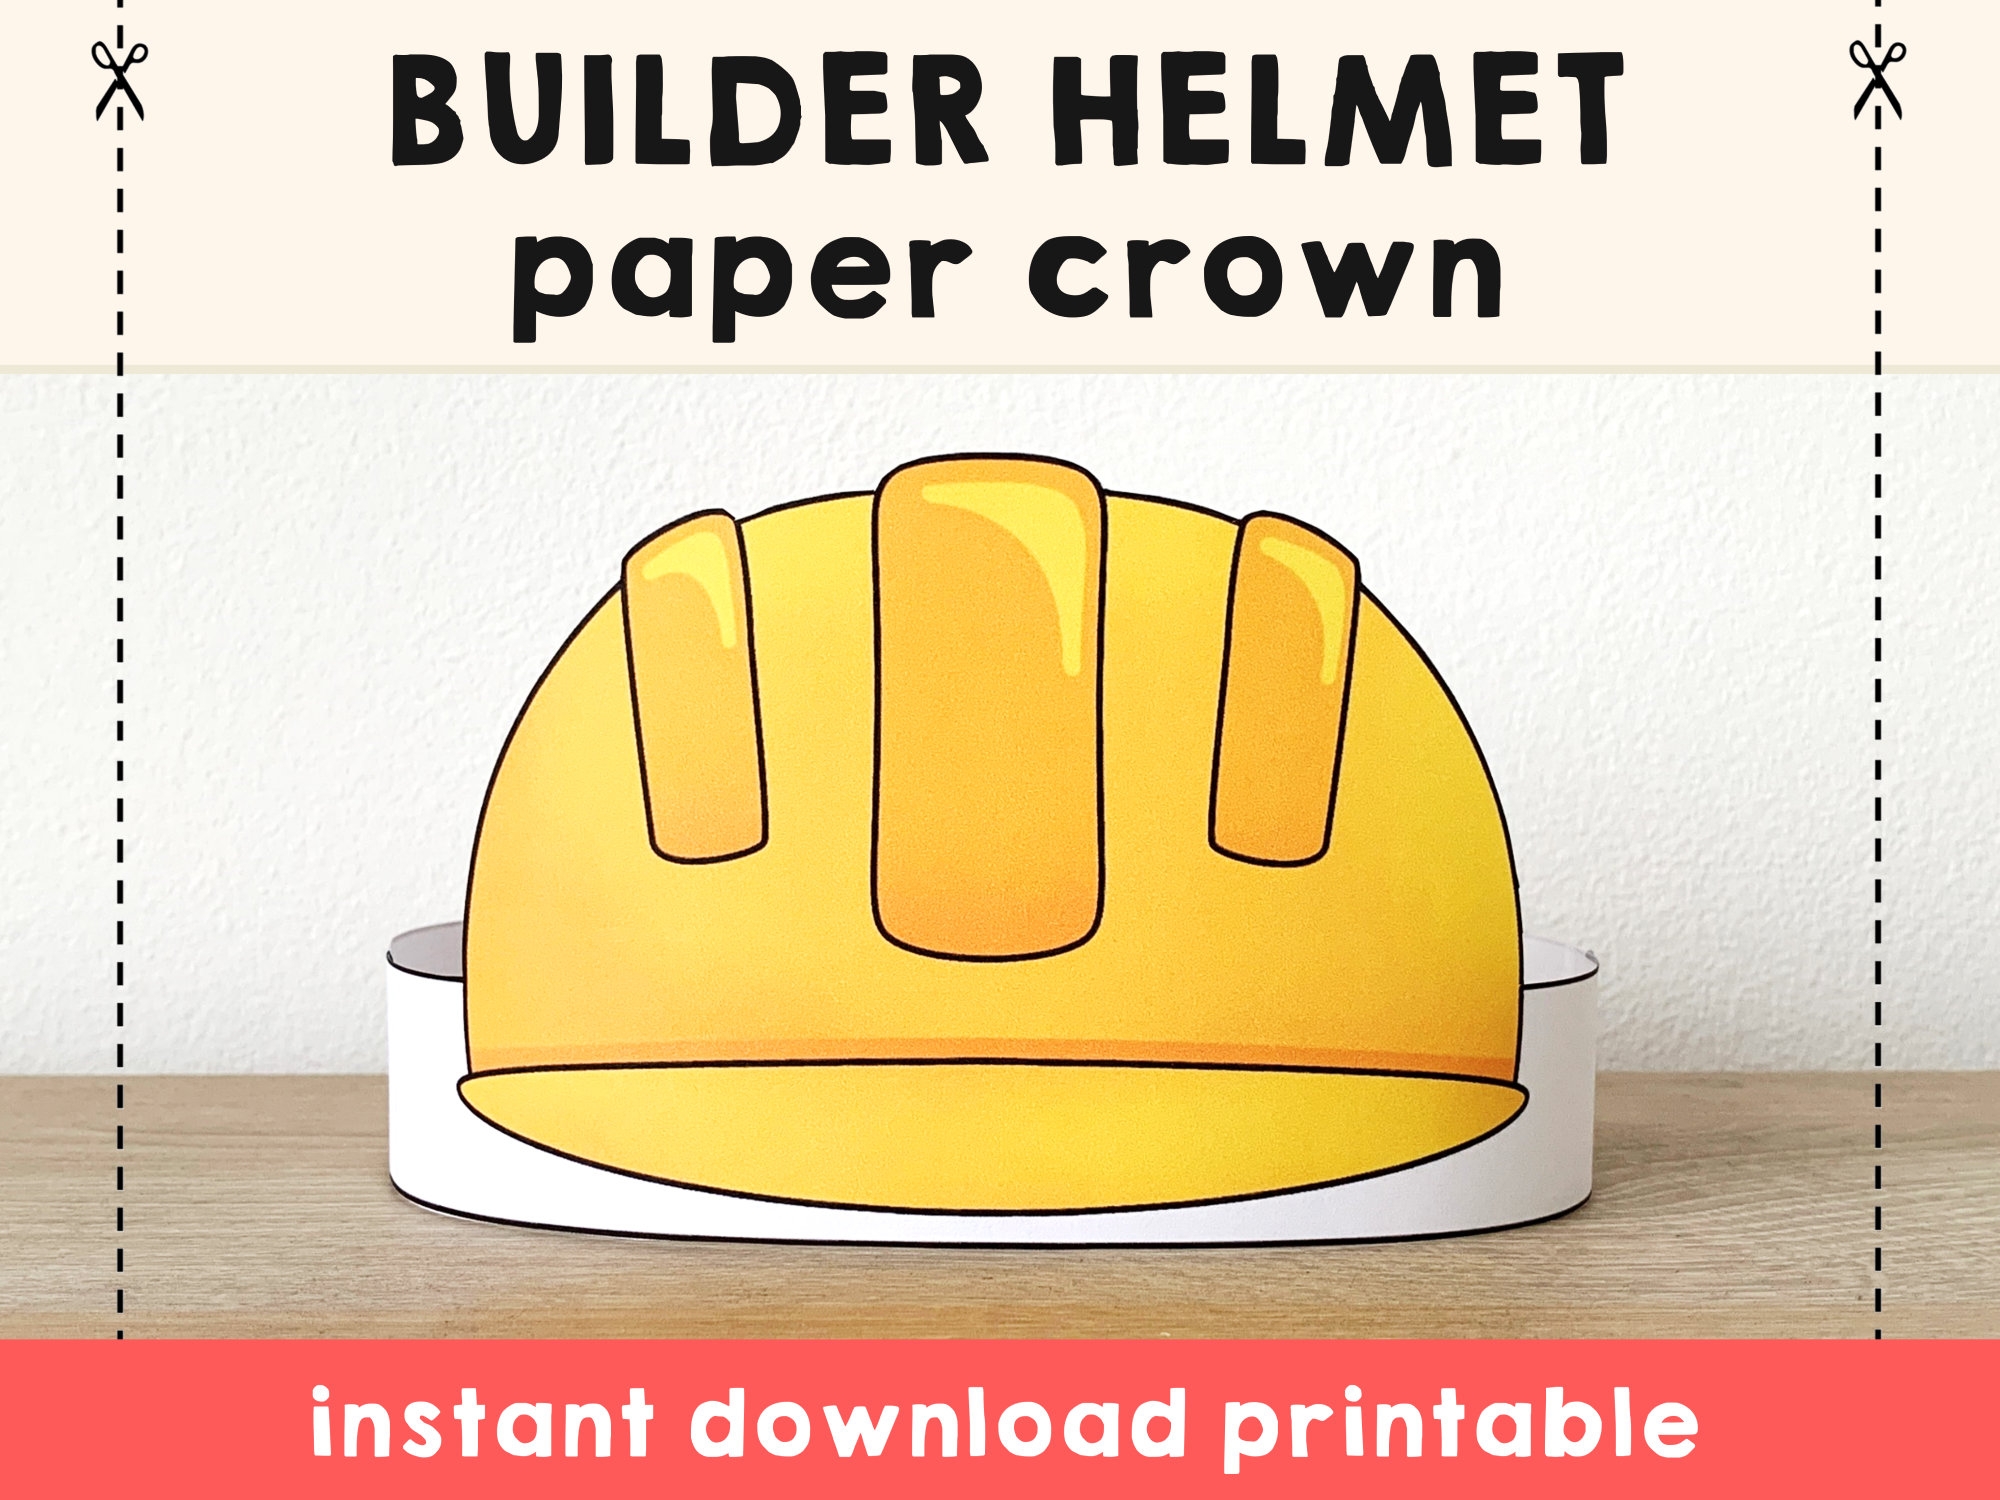 Construction Worker Builder Helmet Paper Crown Party Printable Kids Craft Costume Birthday Printable Favor Template Instant Download Etsy